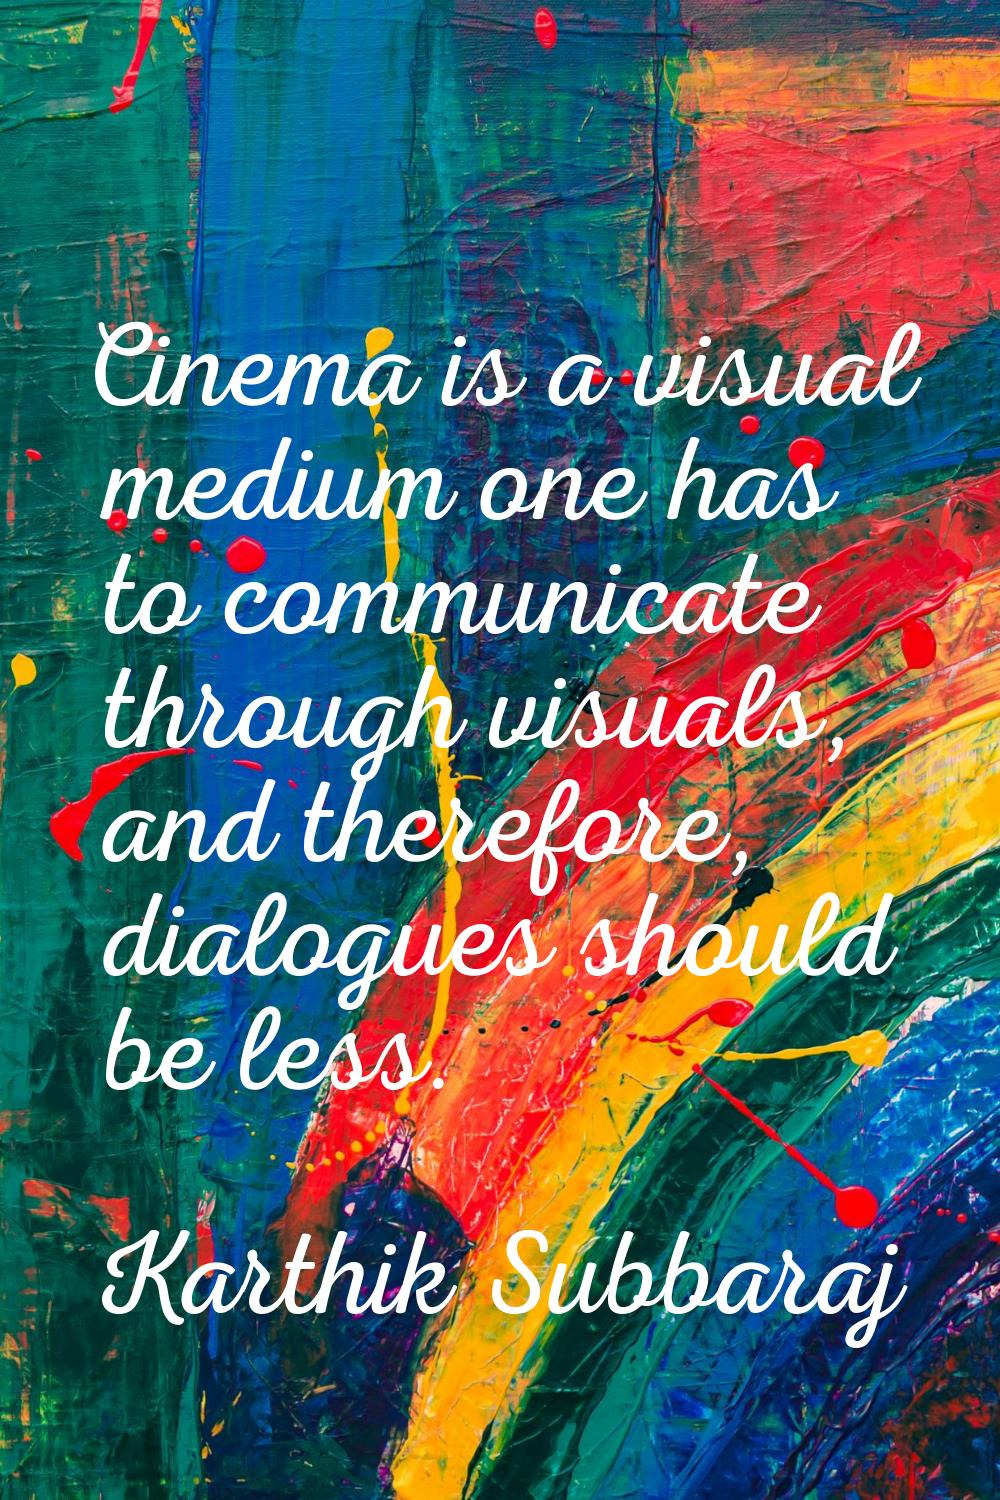 Cinema is a visual medium one has to communicate through visuals, and therefore, dialogues should b